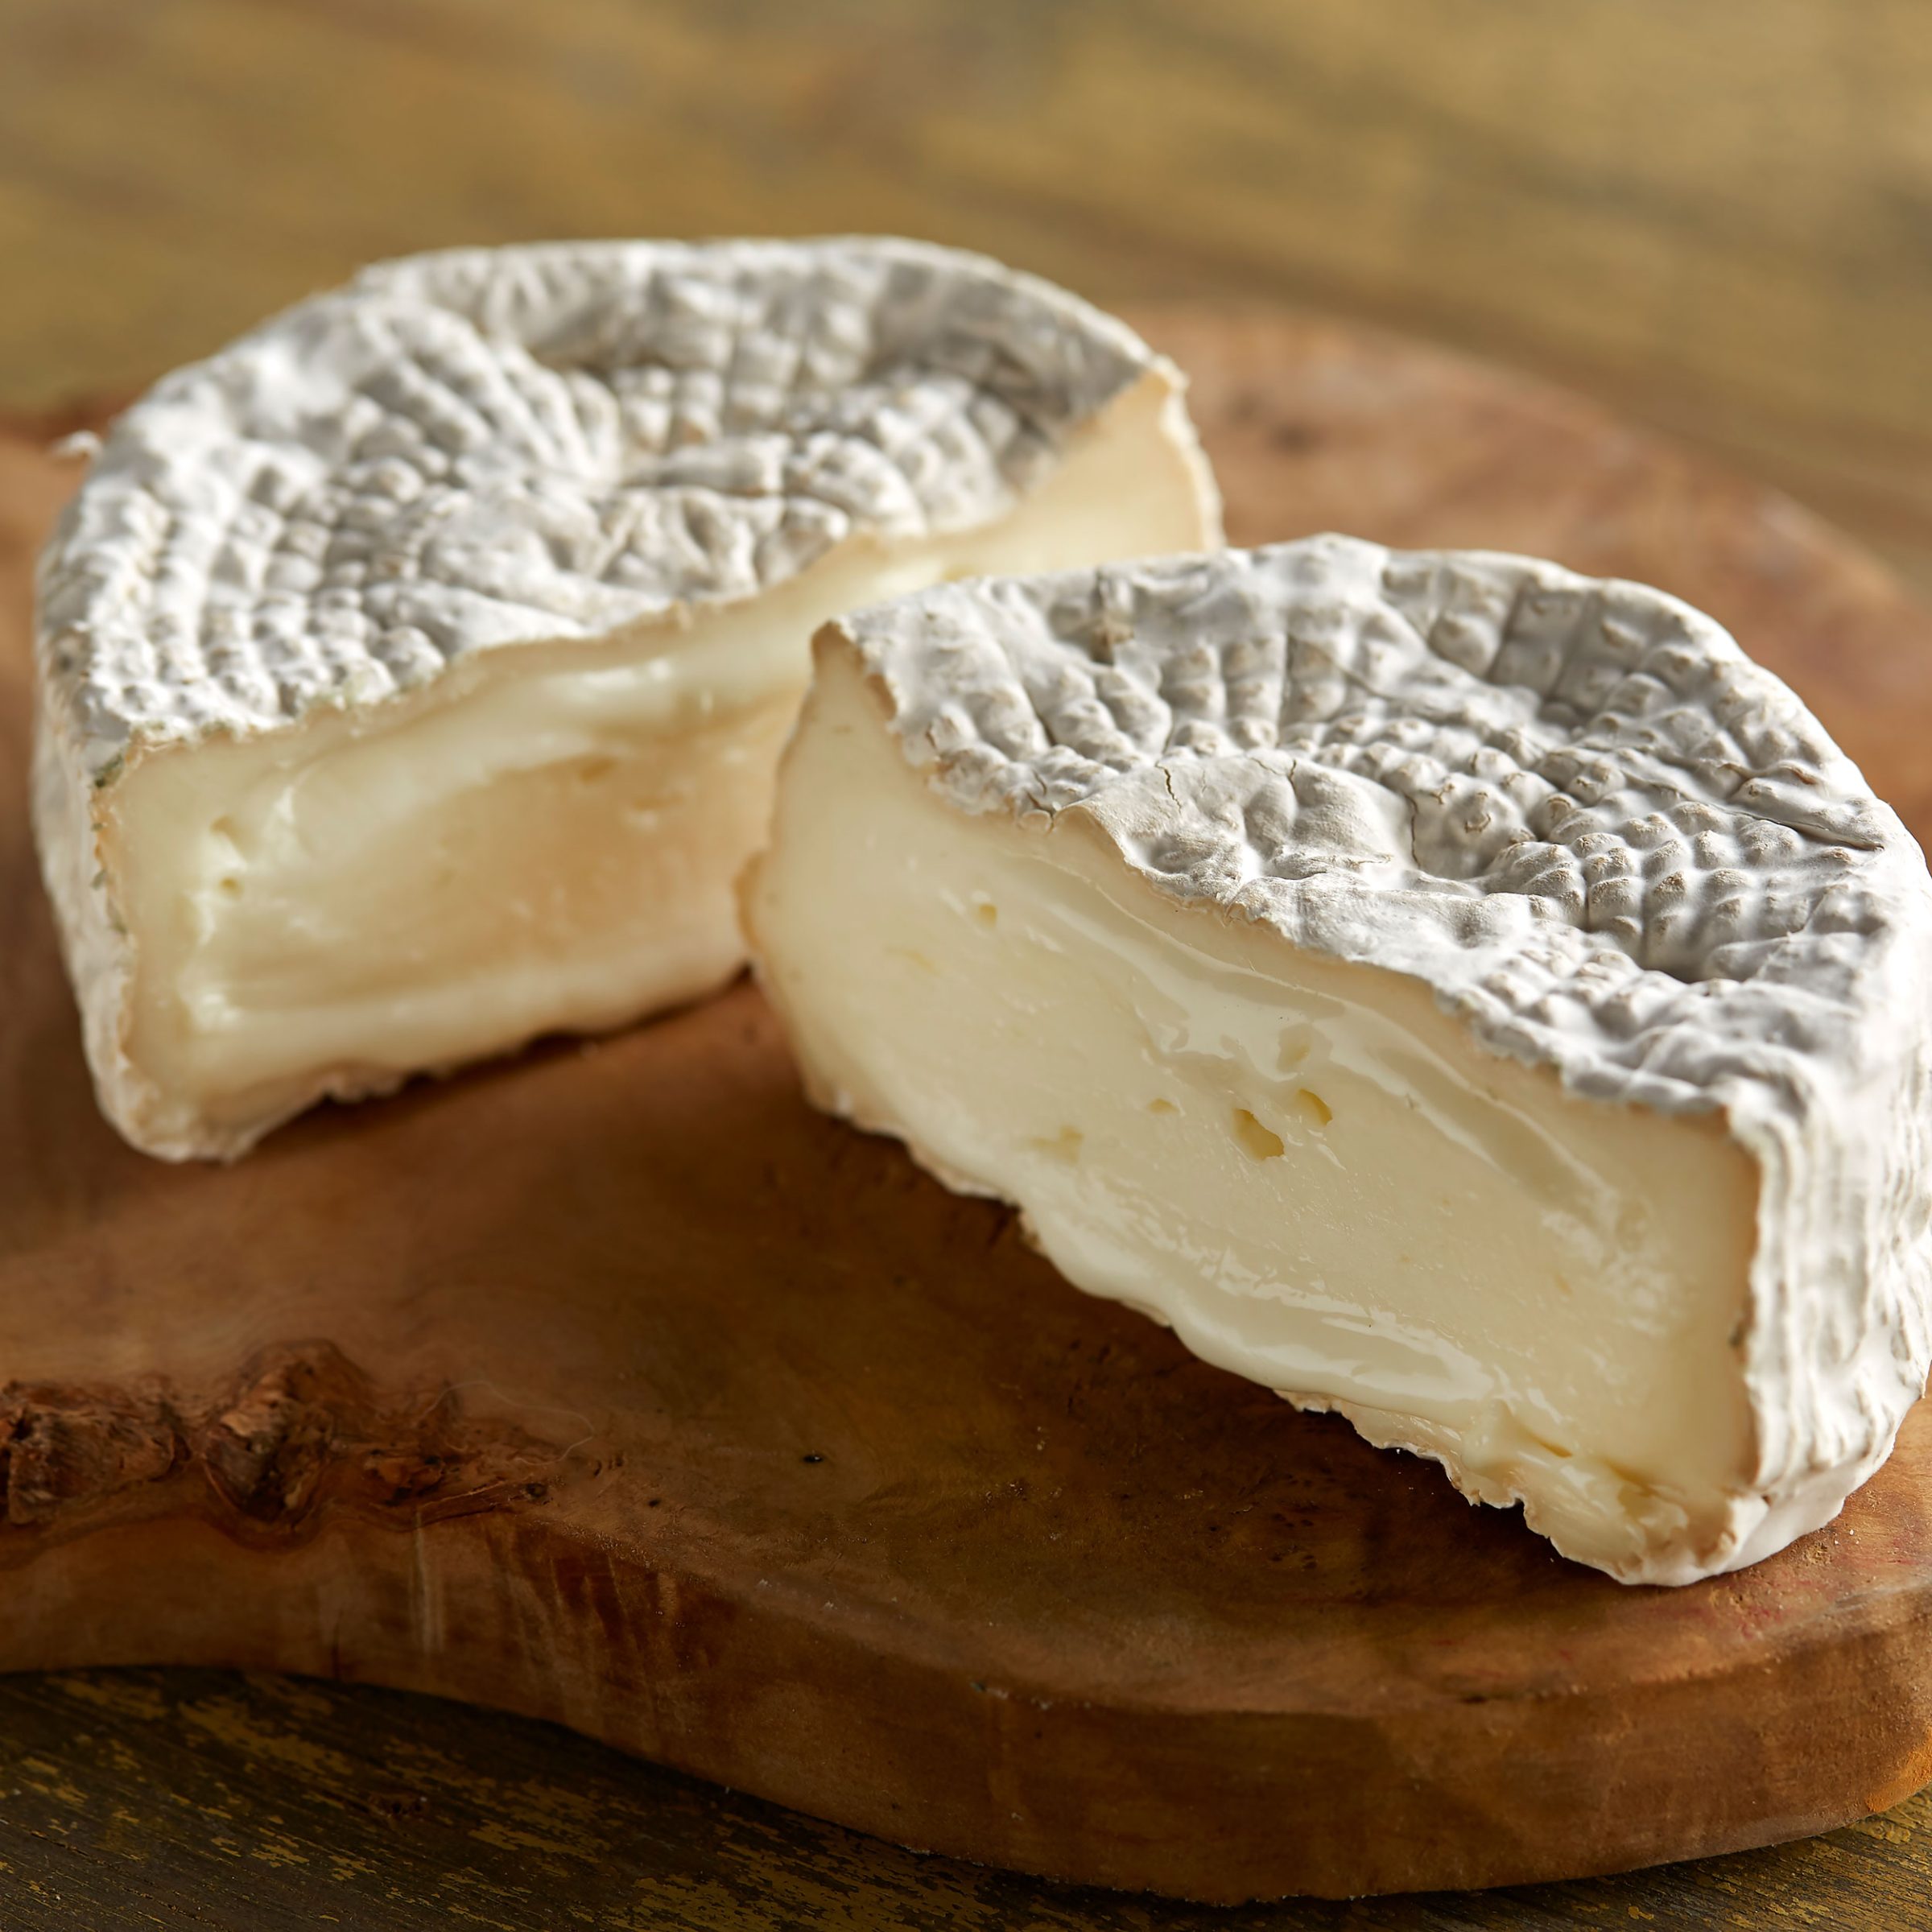 Firefly Farms Merry Goat Round Cheese